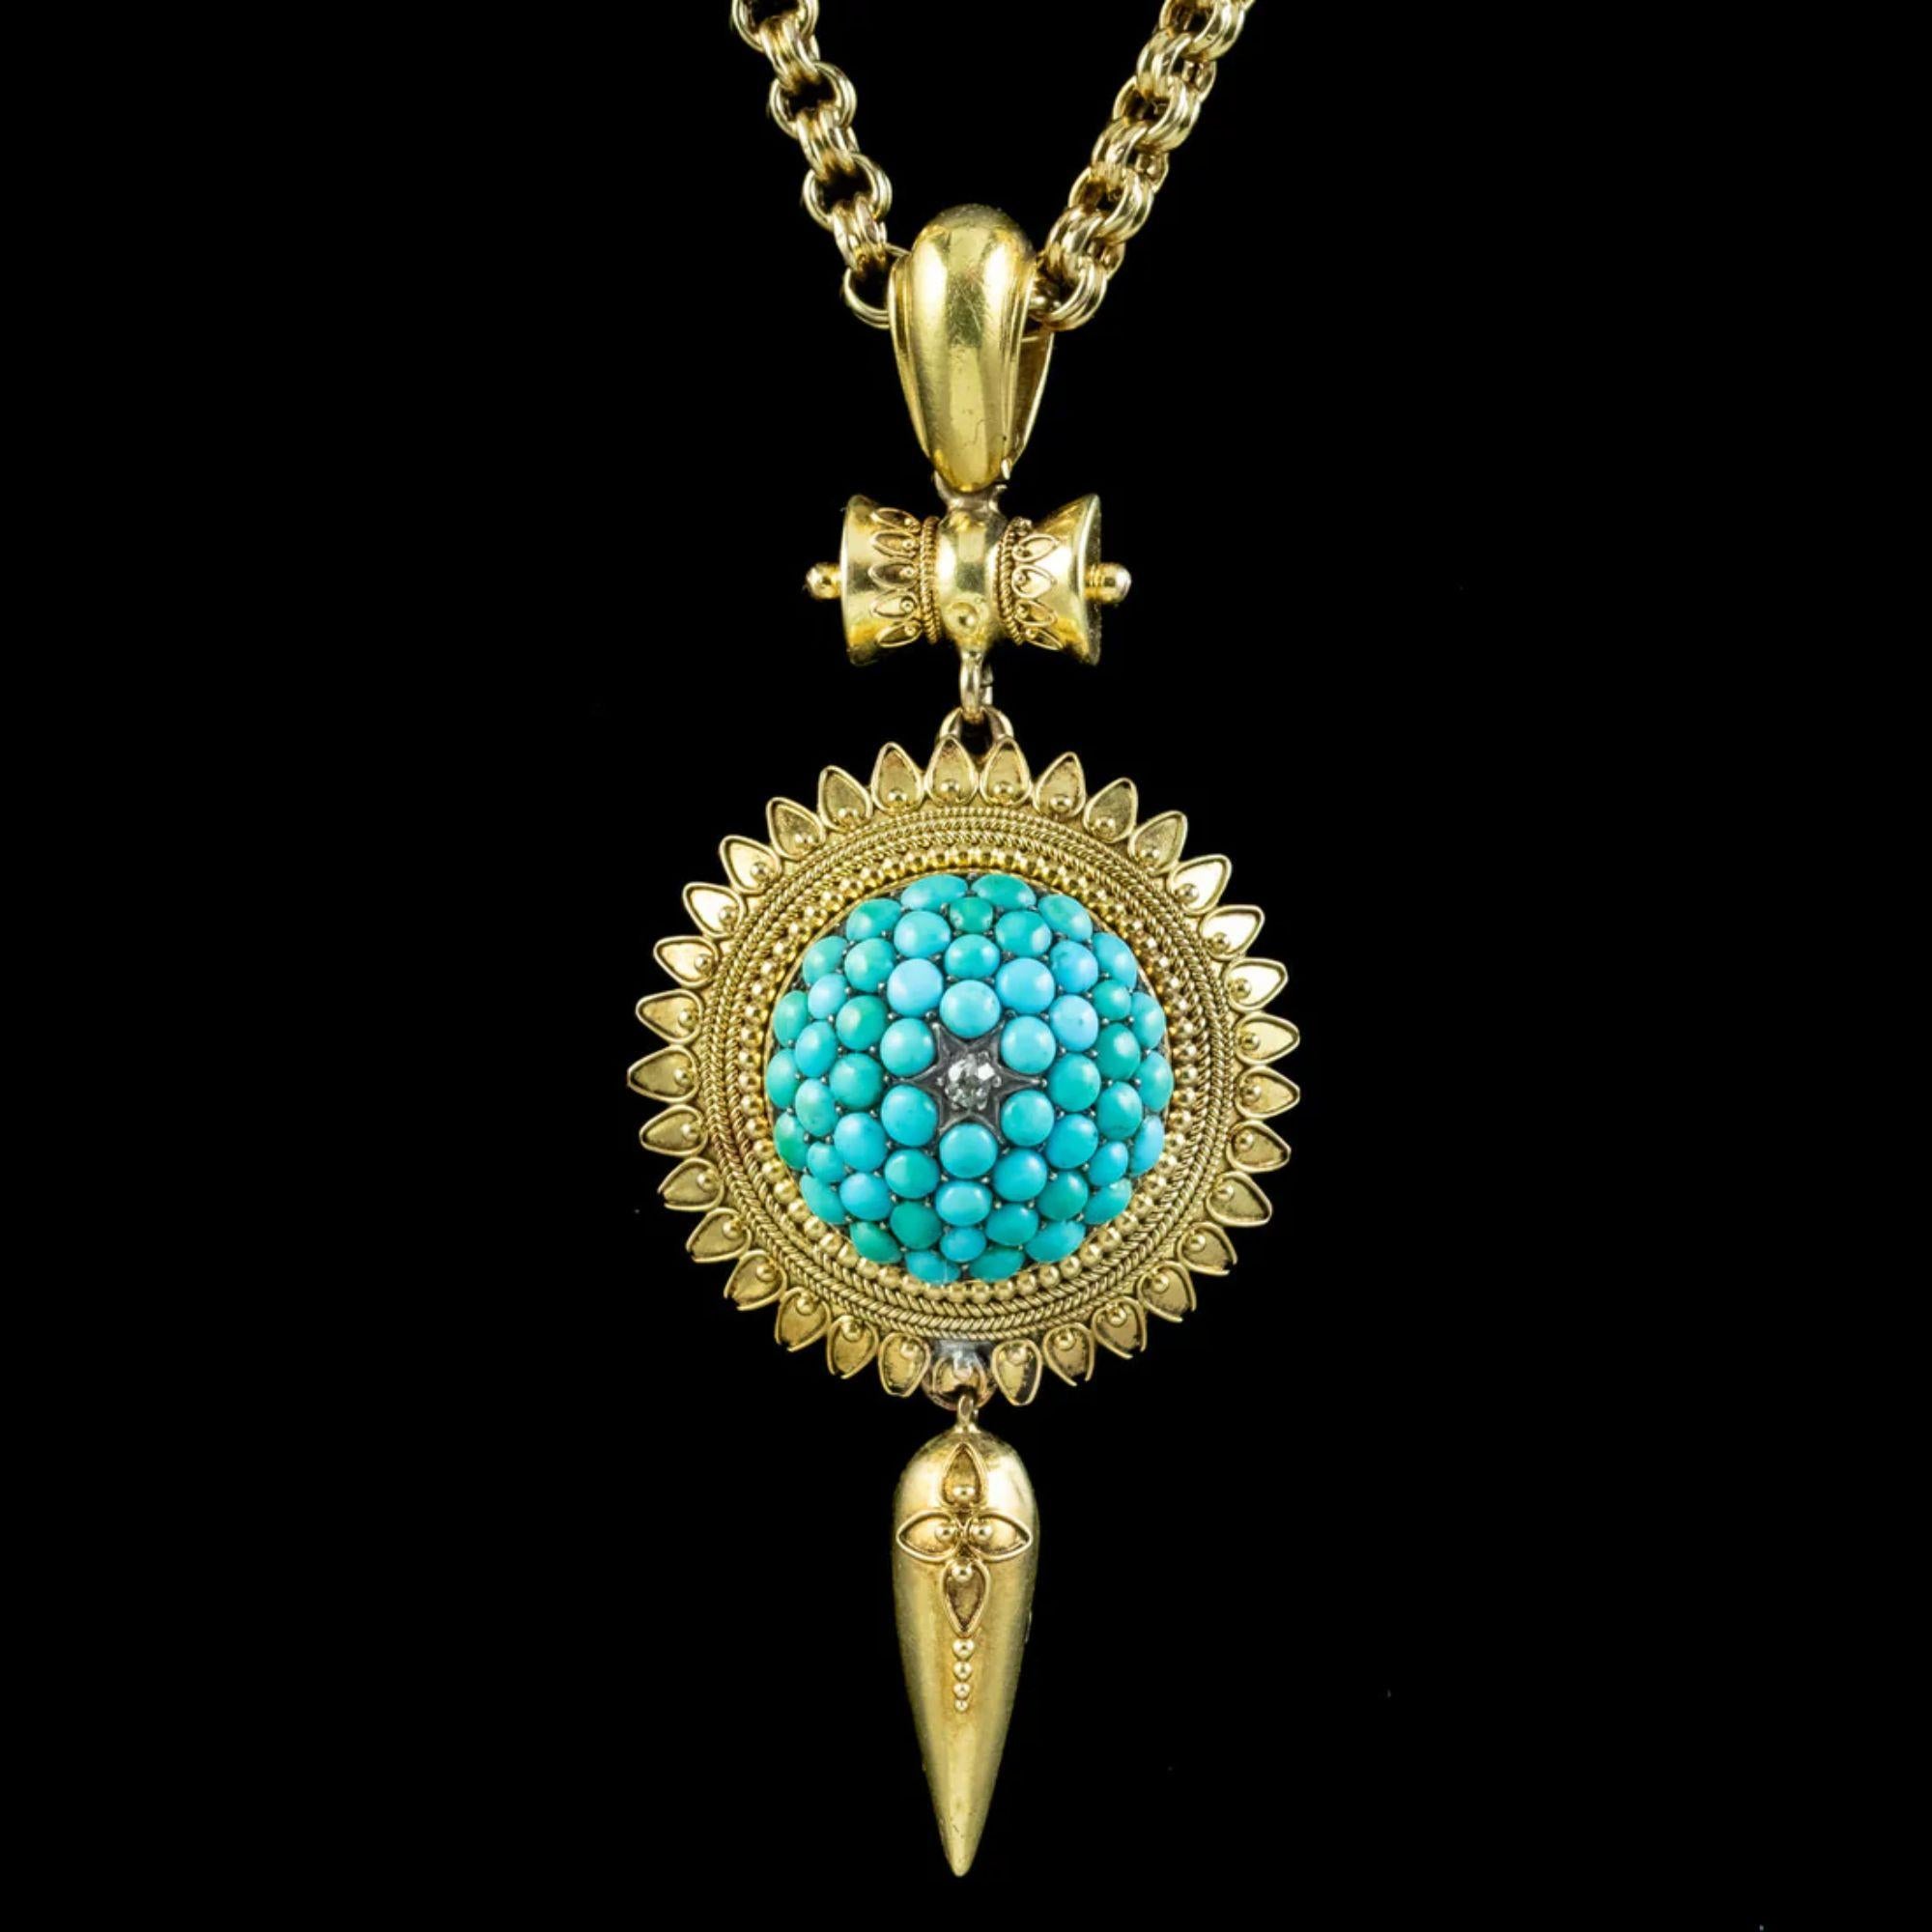 Old Mine Cut Antique Victorian Etruscan Turquoise Locket Pendant Necklace in 18 Carat Gold